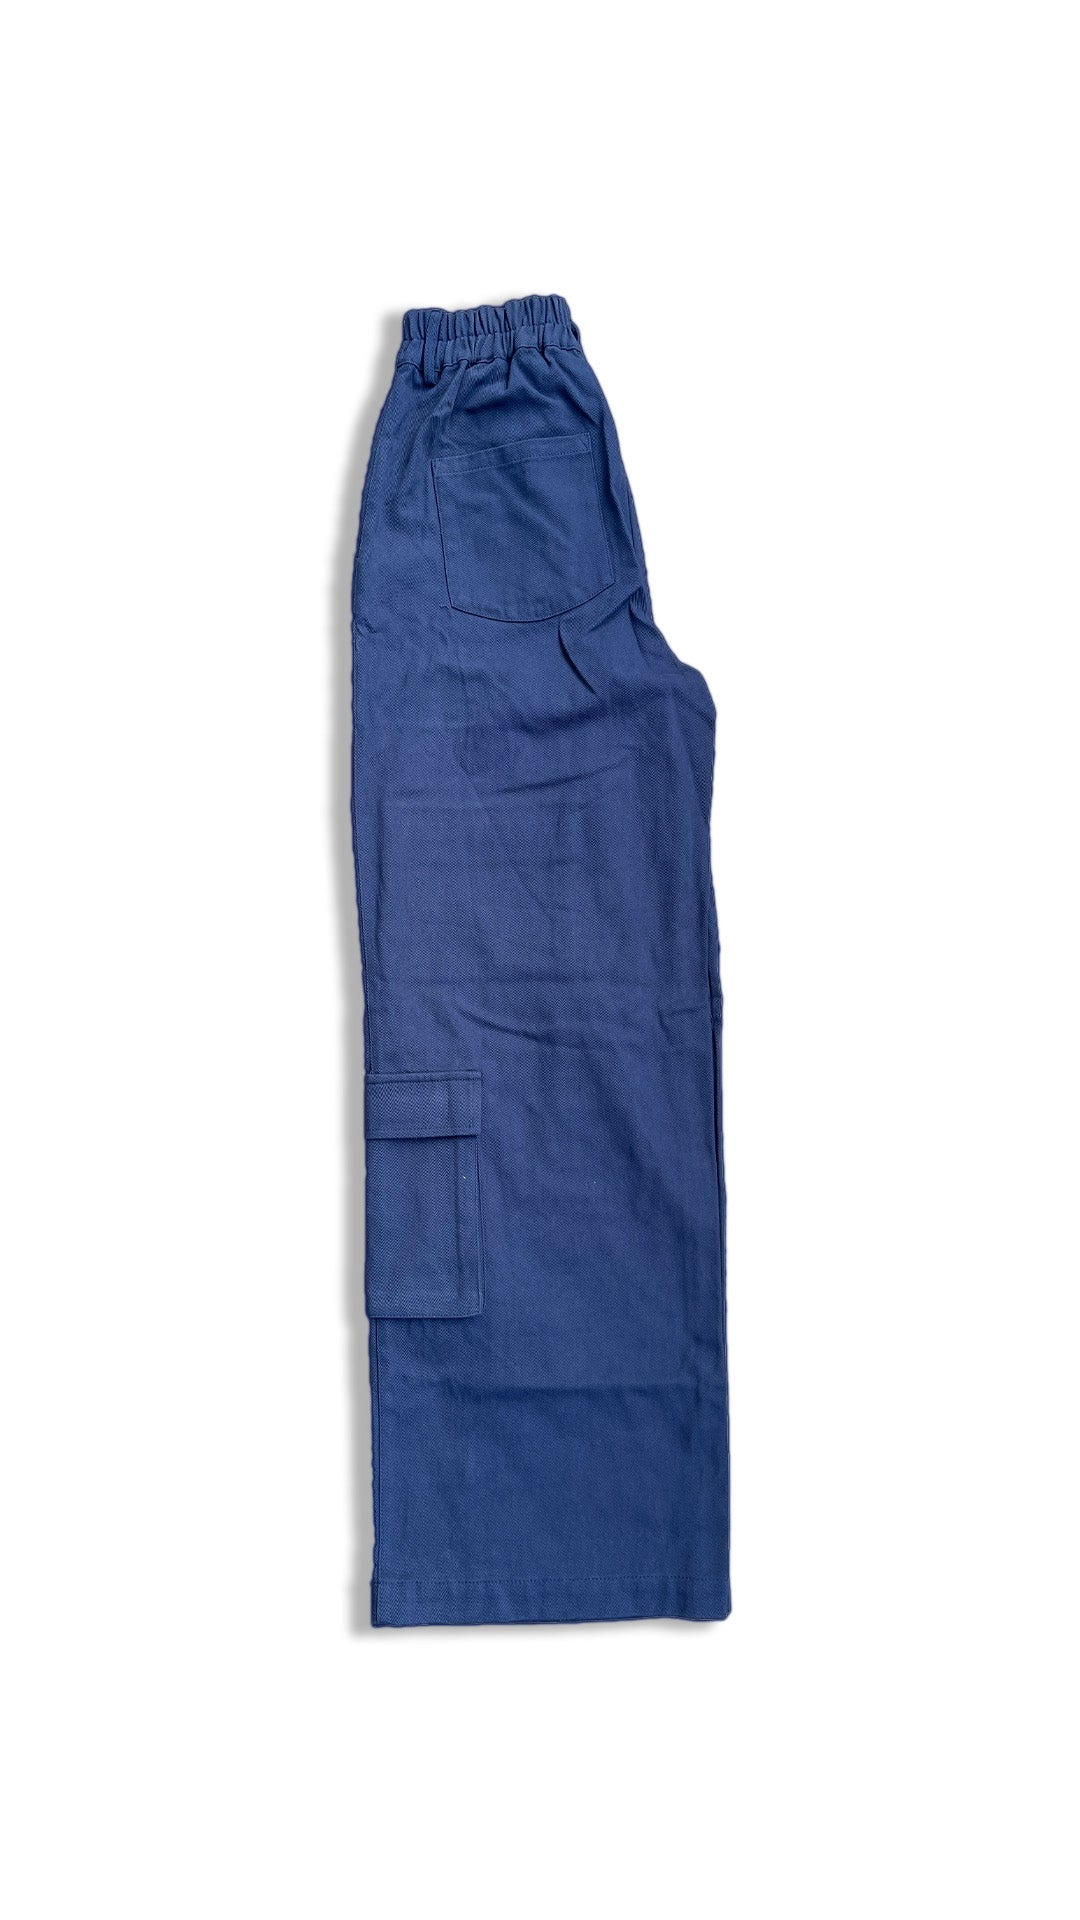 Baggy Cargo Pants - Stylish and Functional Pants for Men and Women